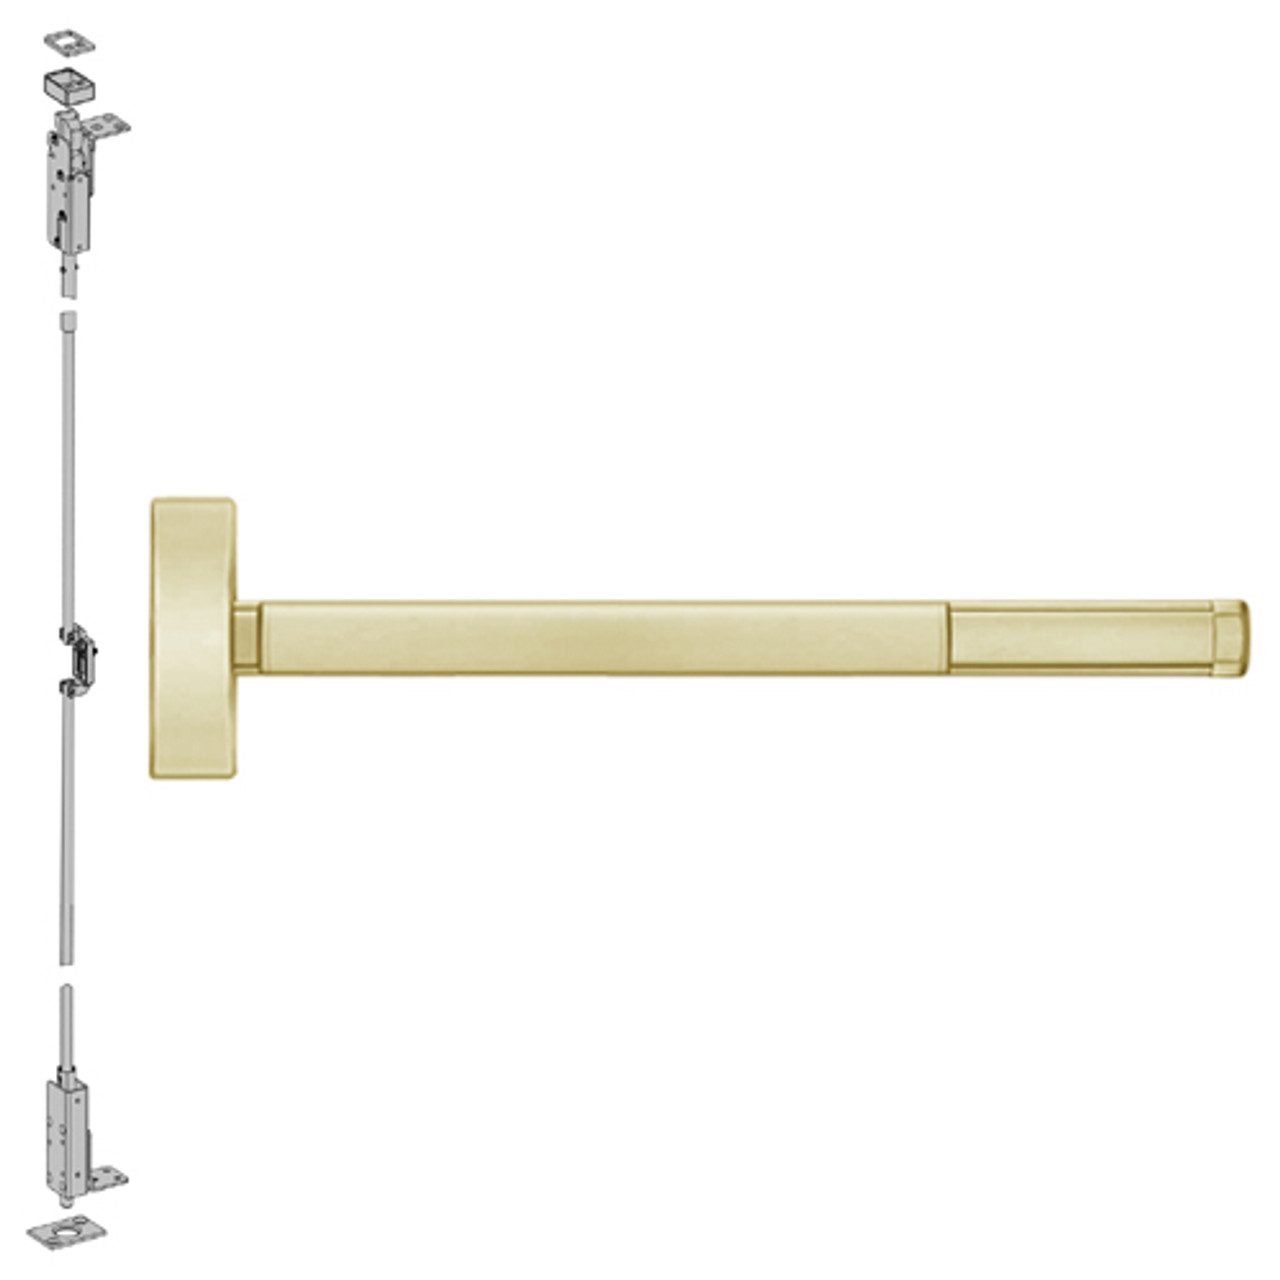 FL2701-606-48 PHI 2700 Series Fire Rated Wood Door Concealed Vertical Exit Device Prepped for Cover Plate in Satin Brass Finish